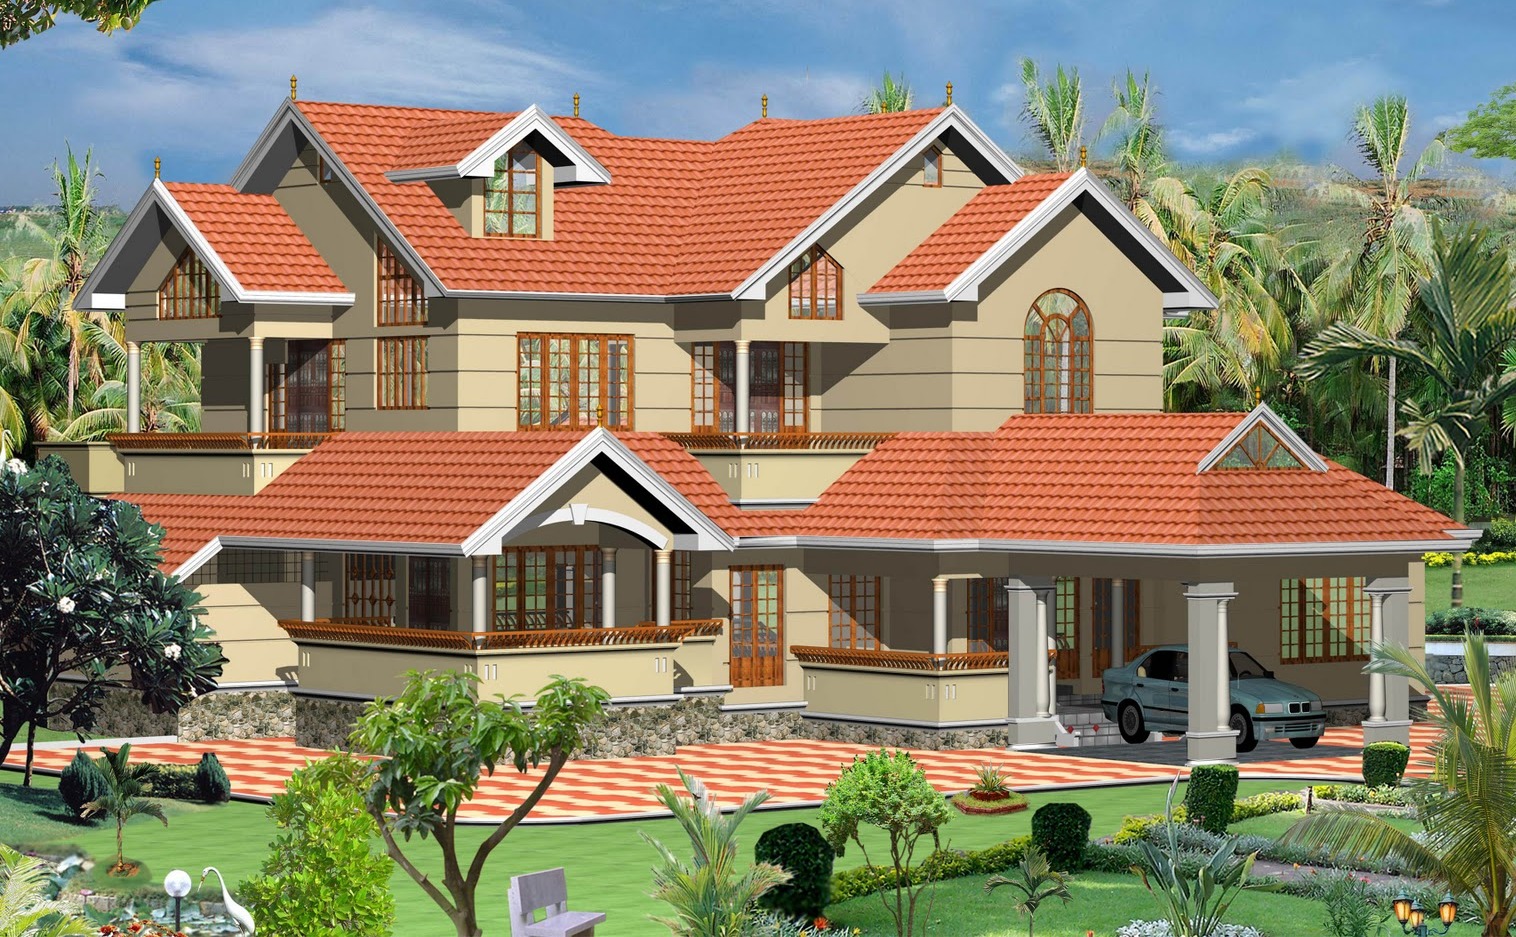 Complete Architectural Solution, House Plans, House Design, Front ...